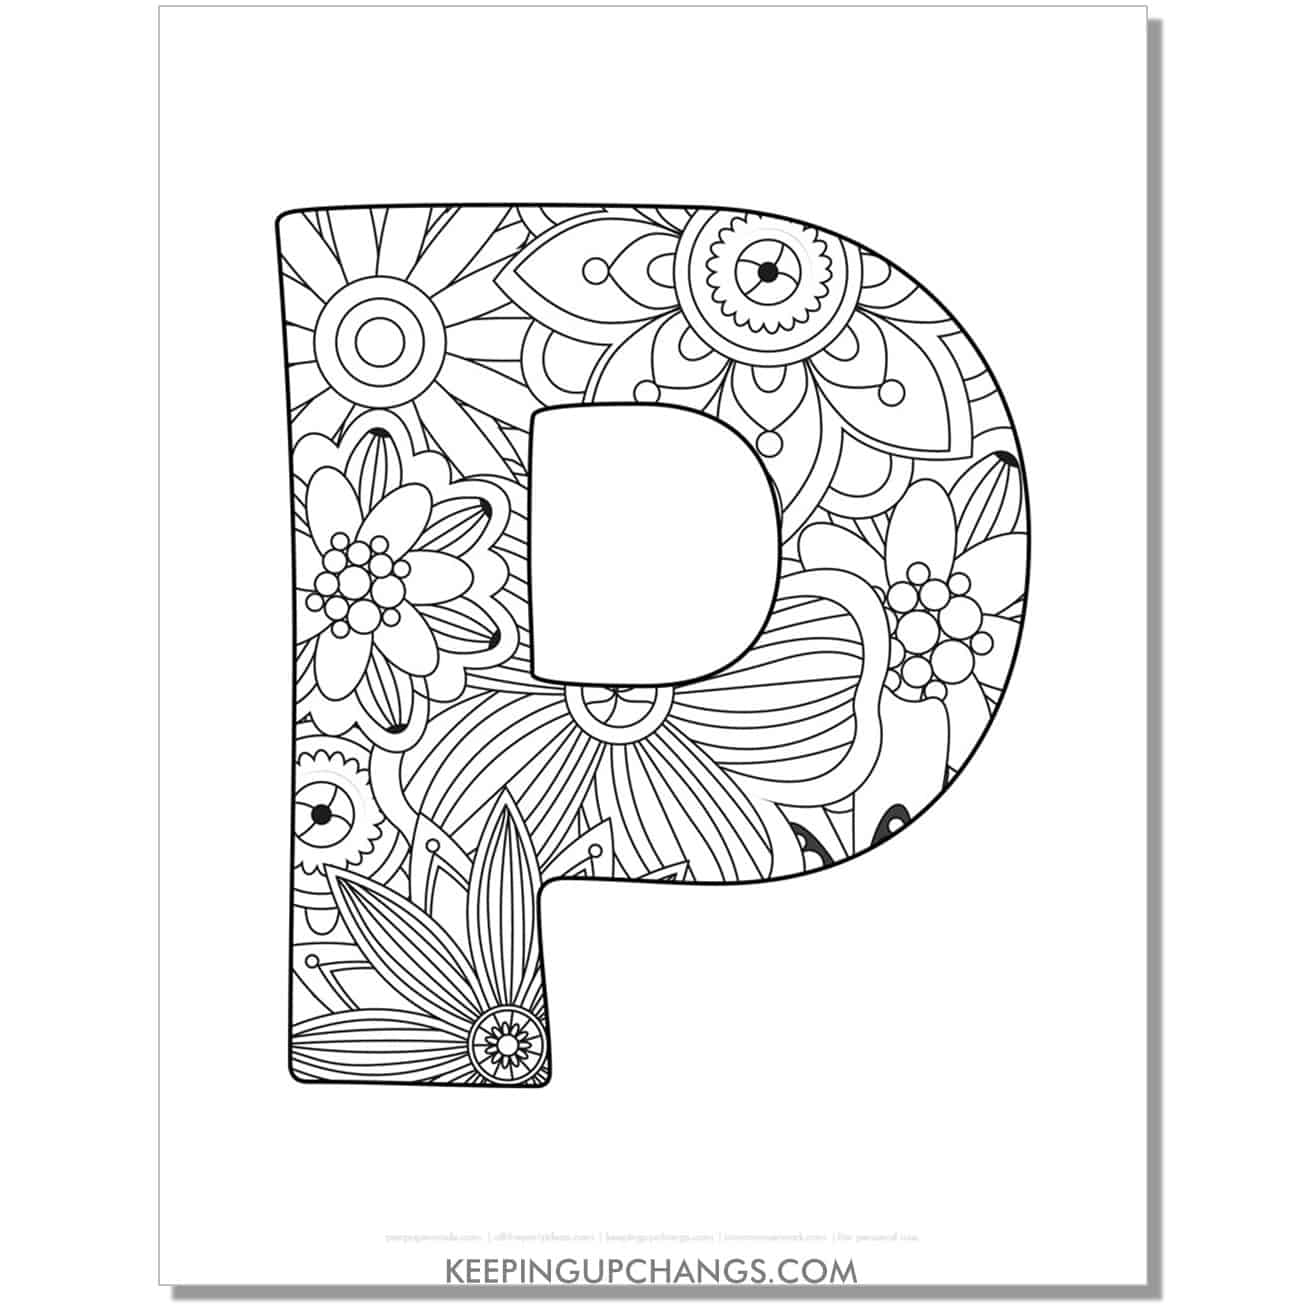 free letter p to color, complex mandala zentangle for adults.